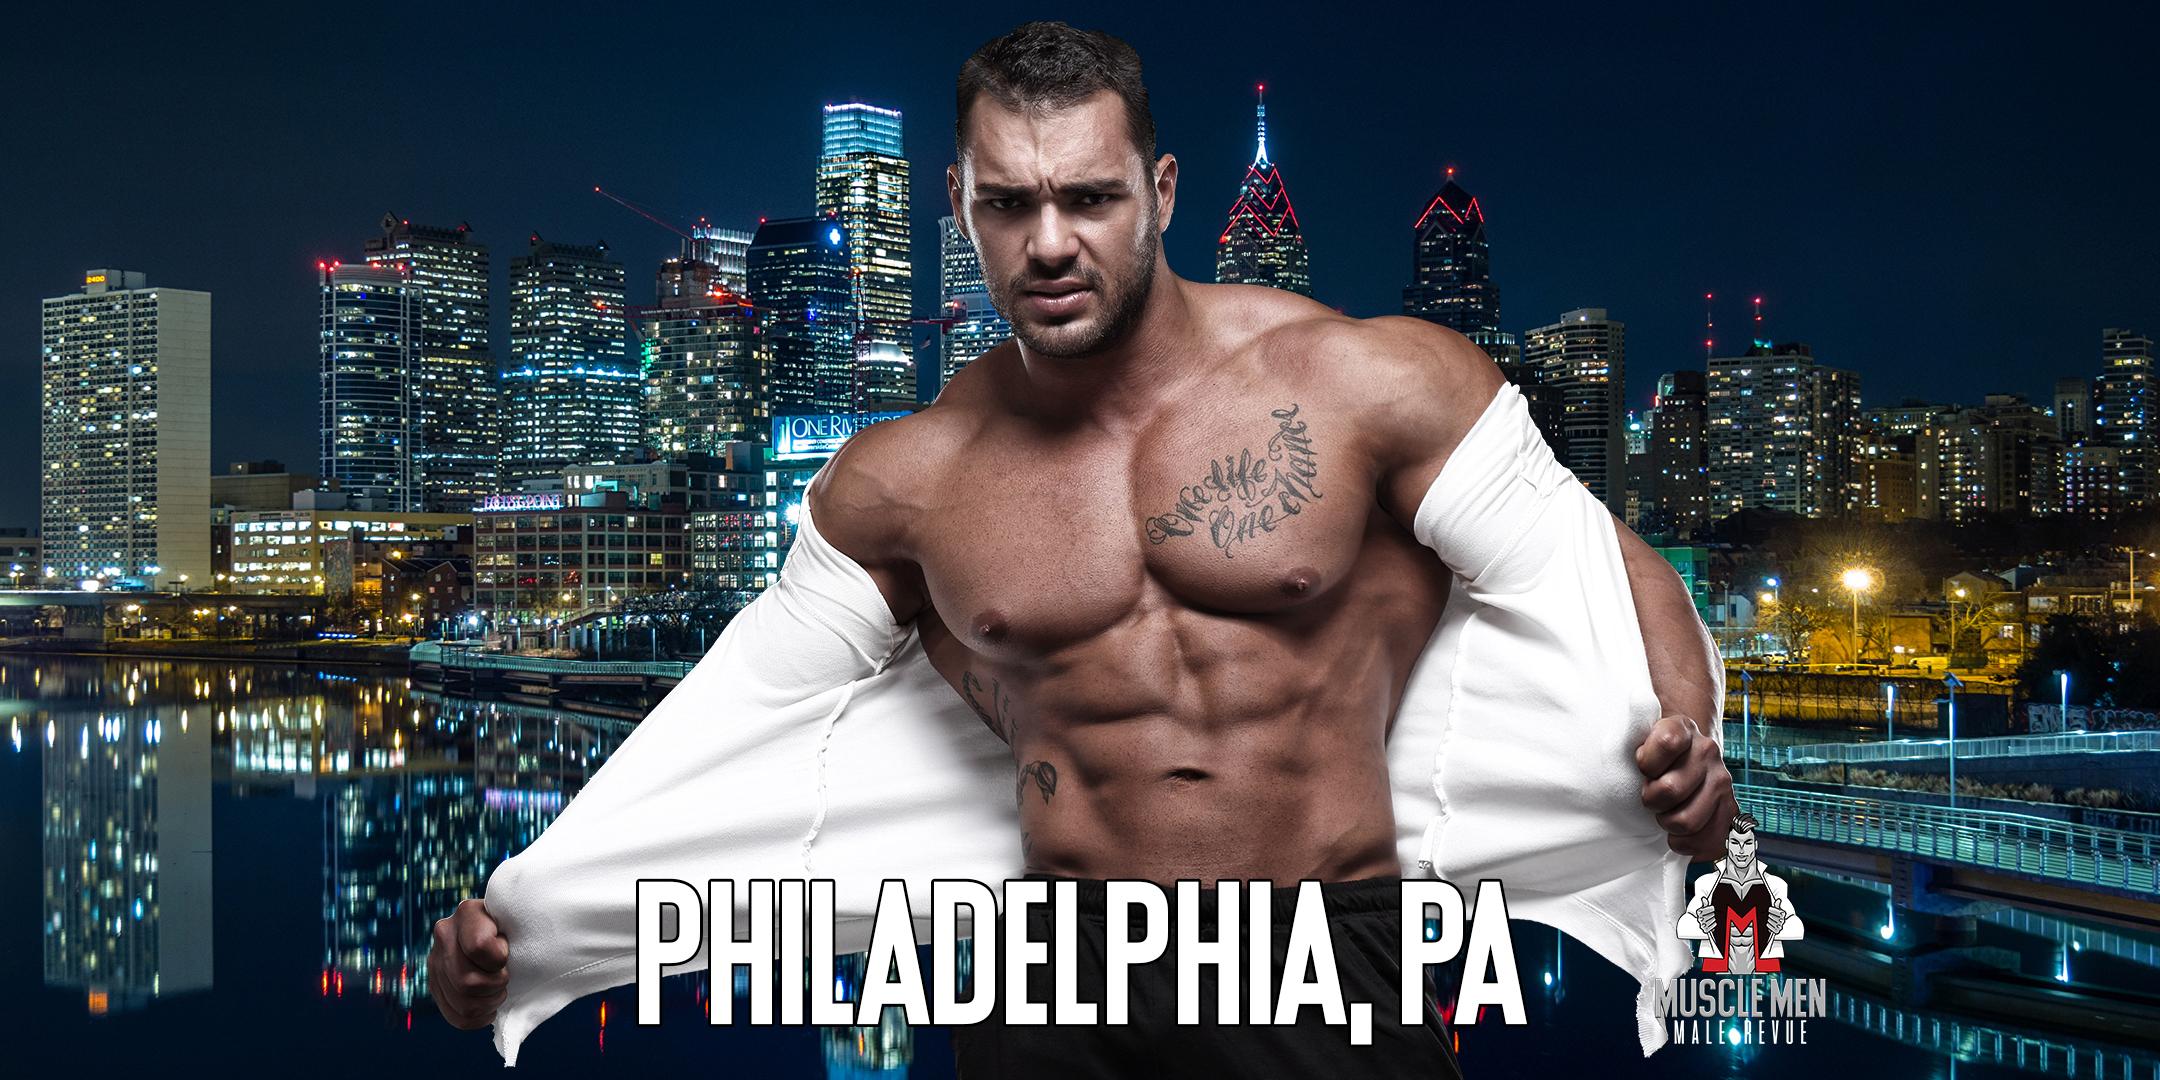 Muscle Men Male Strippers Revue And Male Strip Club Shows Philadelphia Pa 8pm To 10pm 13 Feb 2021